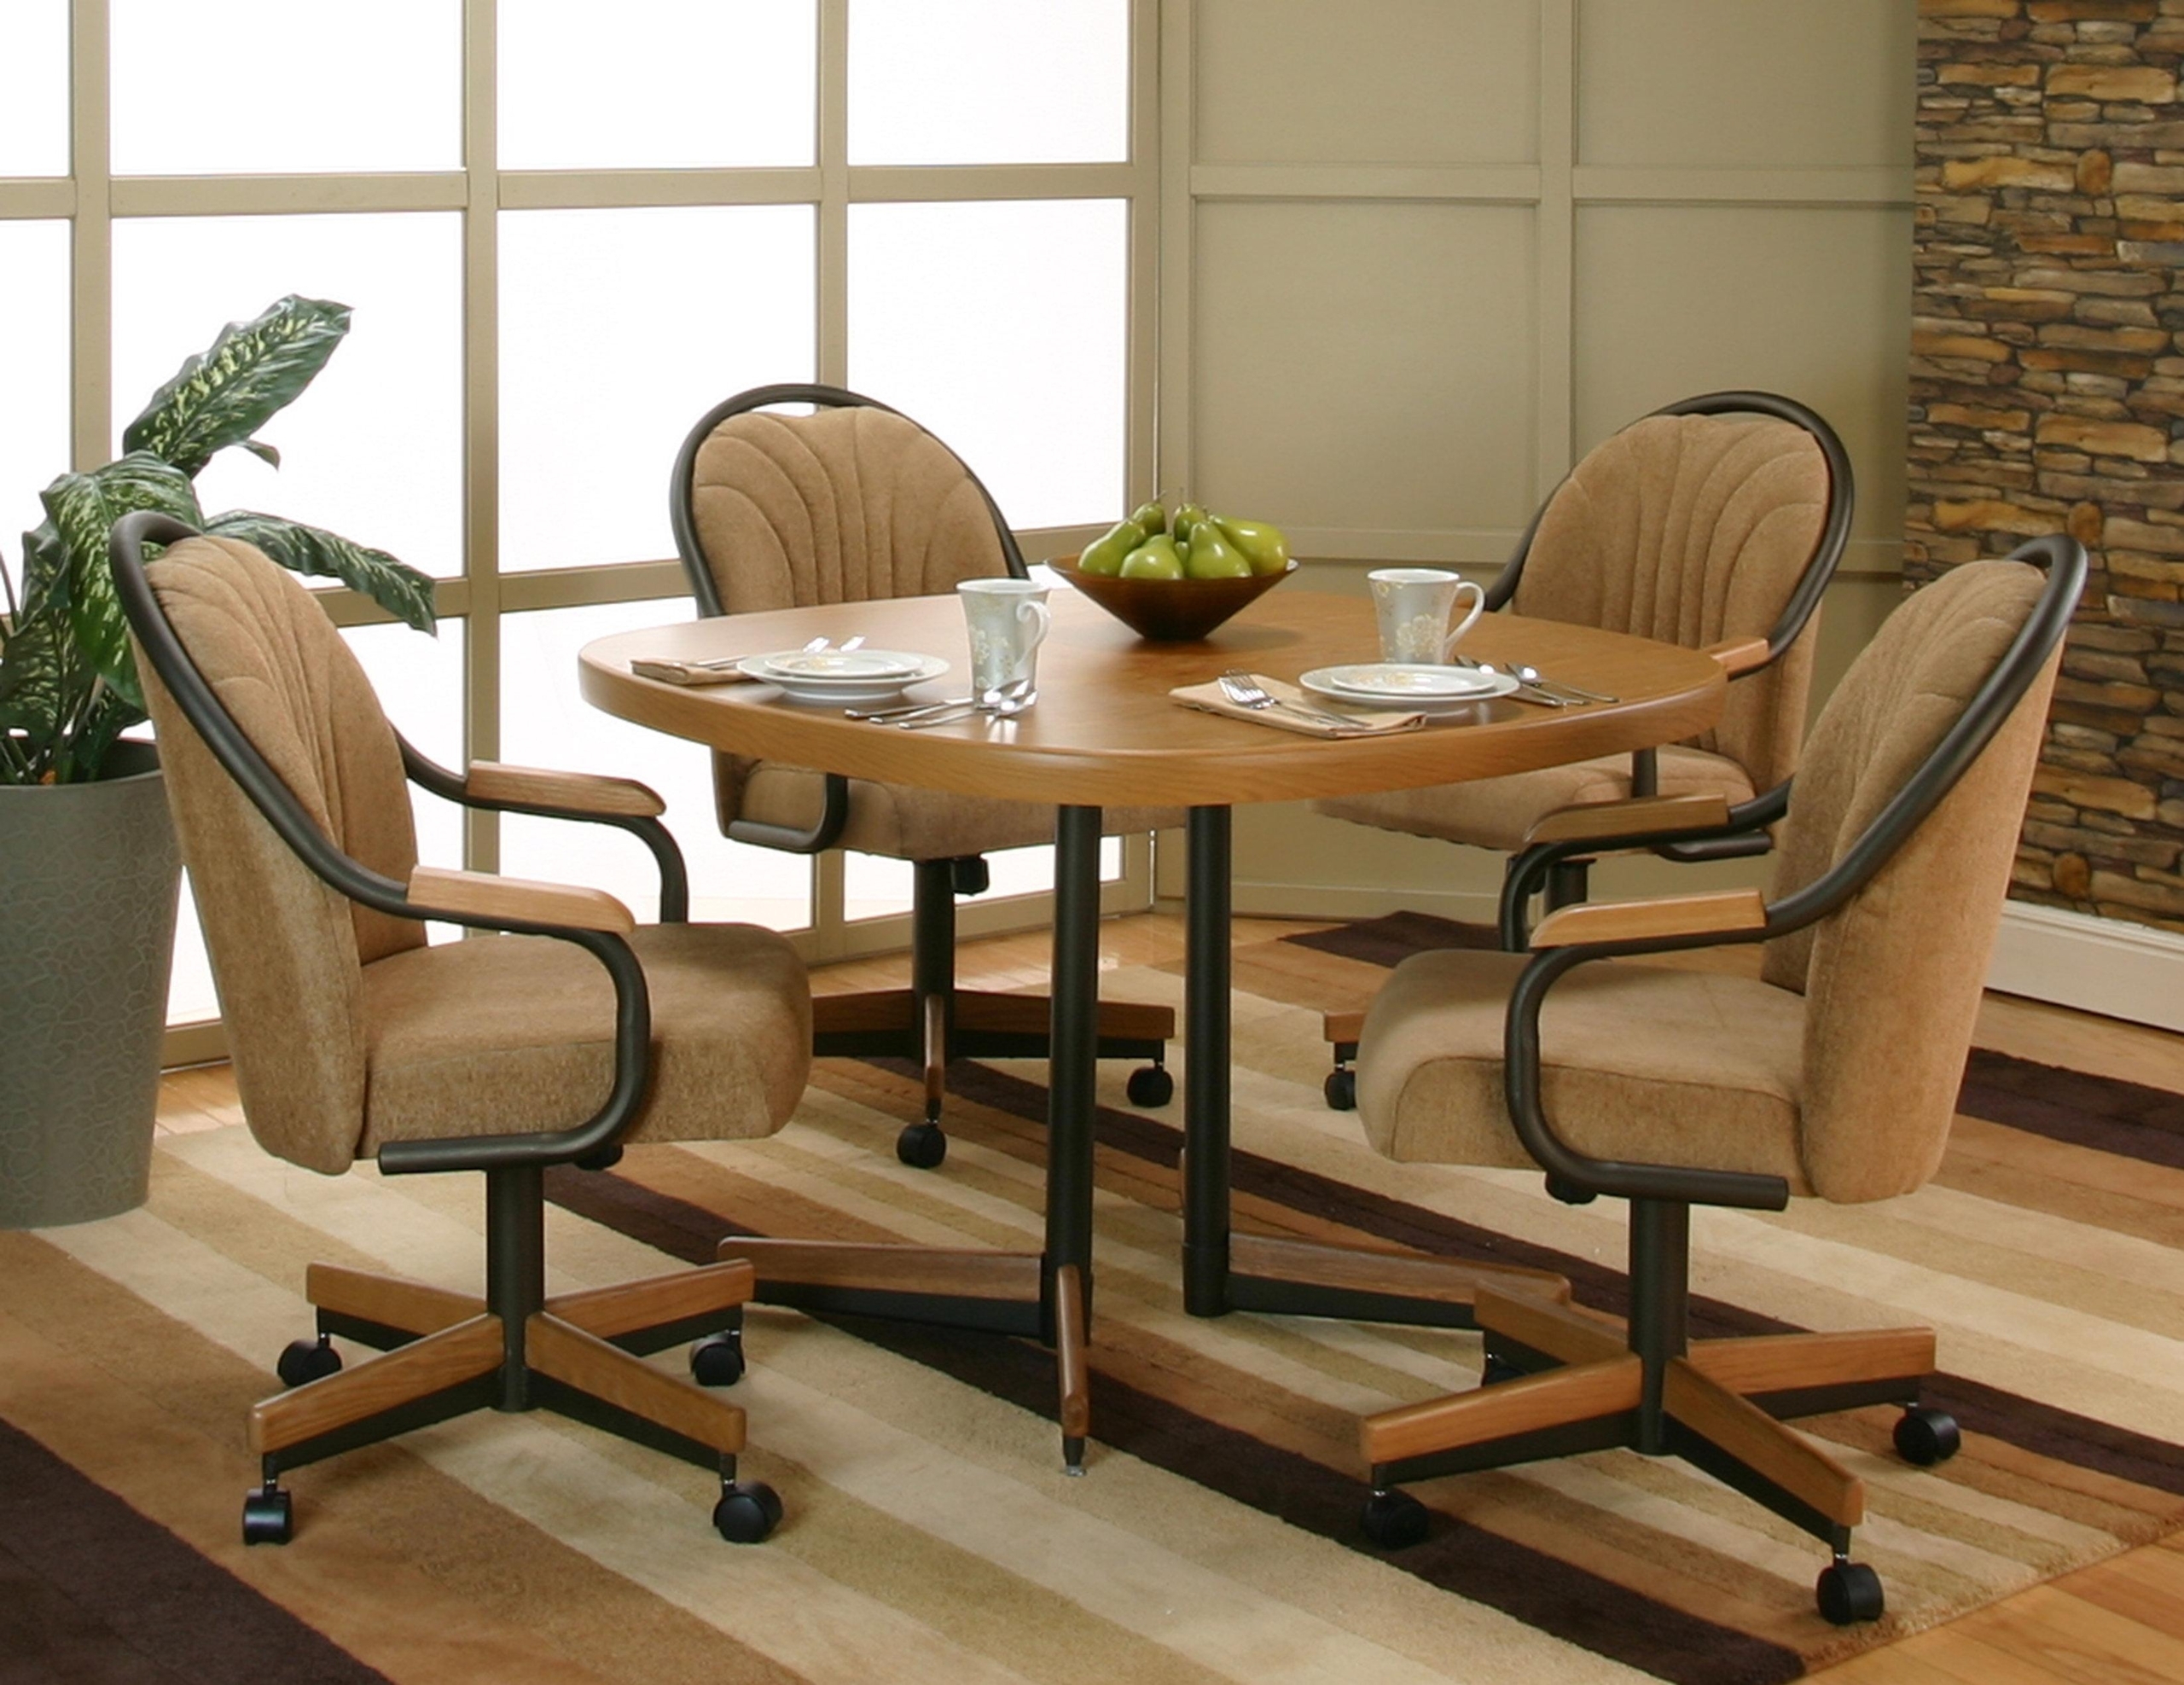 Set Of 4 Kitchen Chairs With Casters